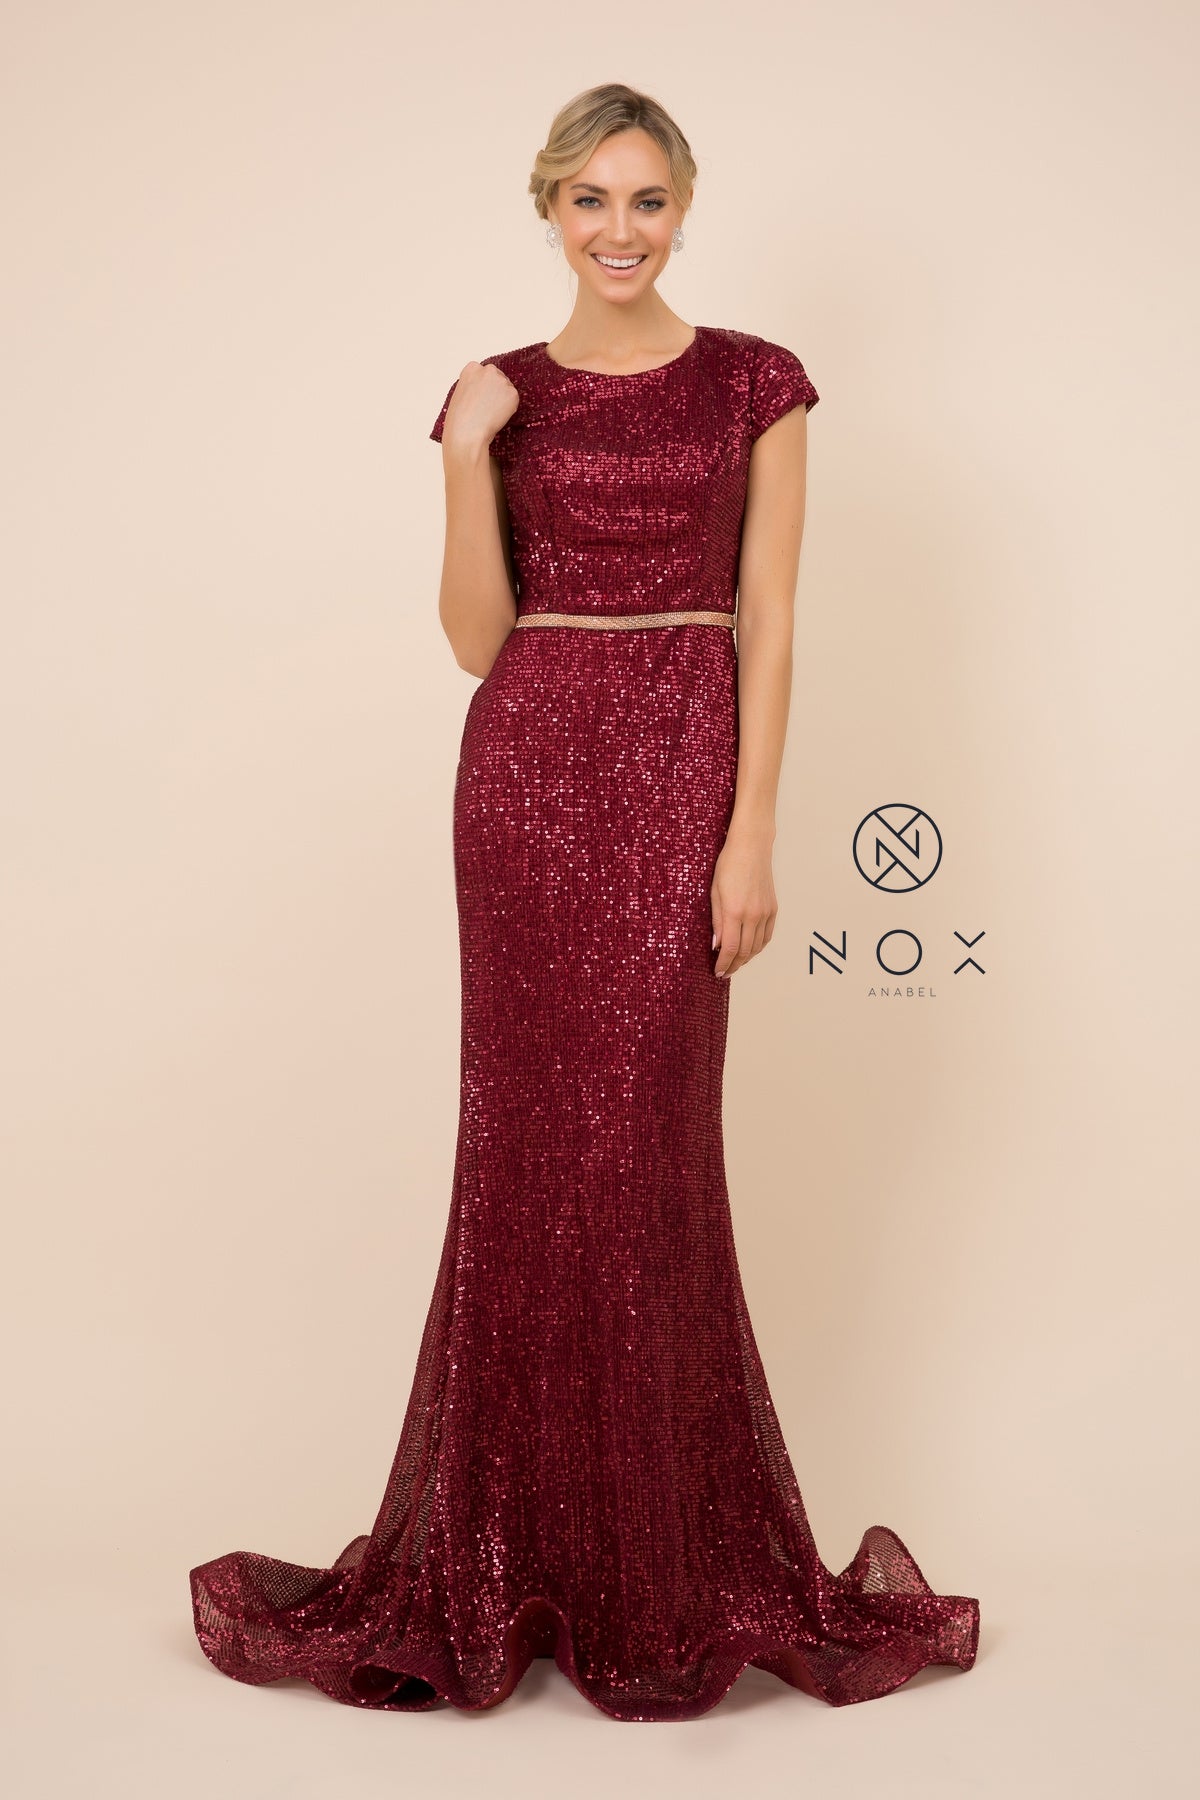 MyFashion.com - SHORT-SLEEVED MERMAID GOWN WITH ENCLOSED BACK (F338) - Nox Anabel promdress eveningdress fashion partydress weddingdress 
 gown homecoming promgown weddinggown 